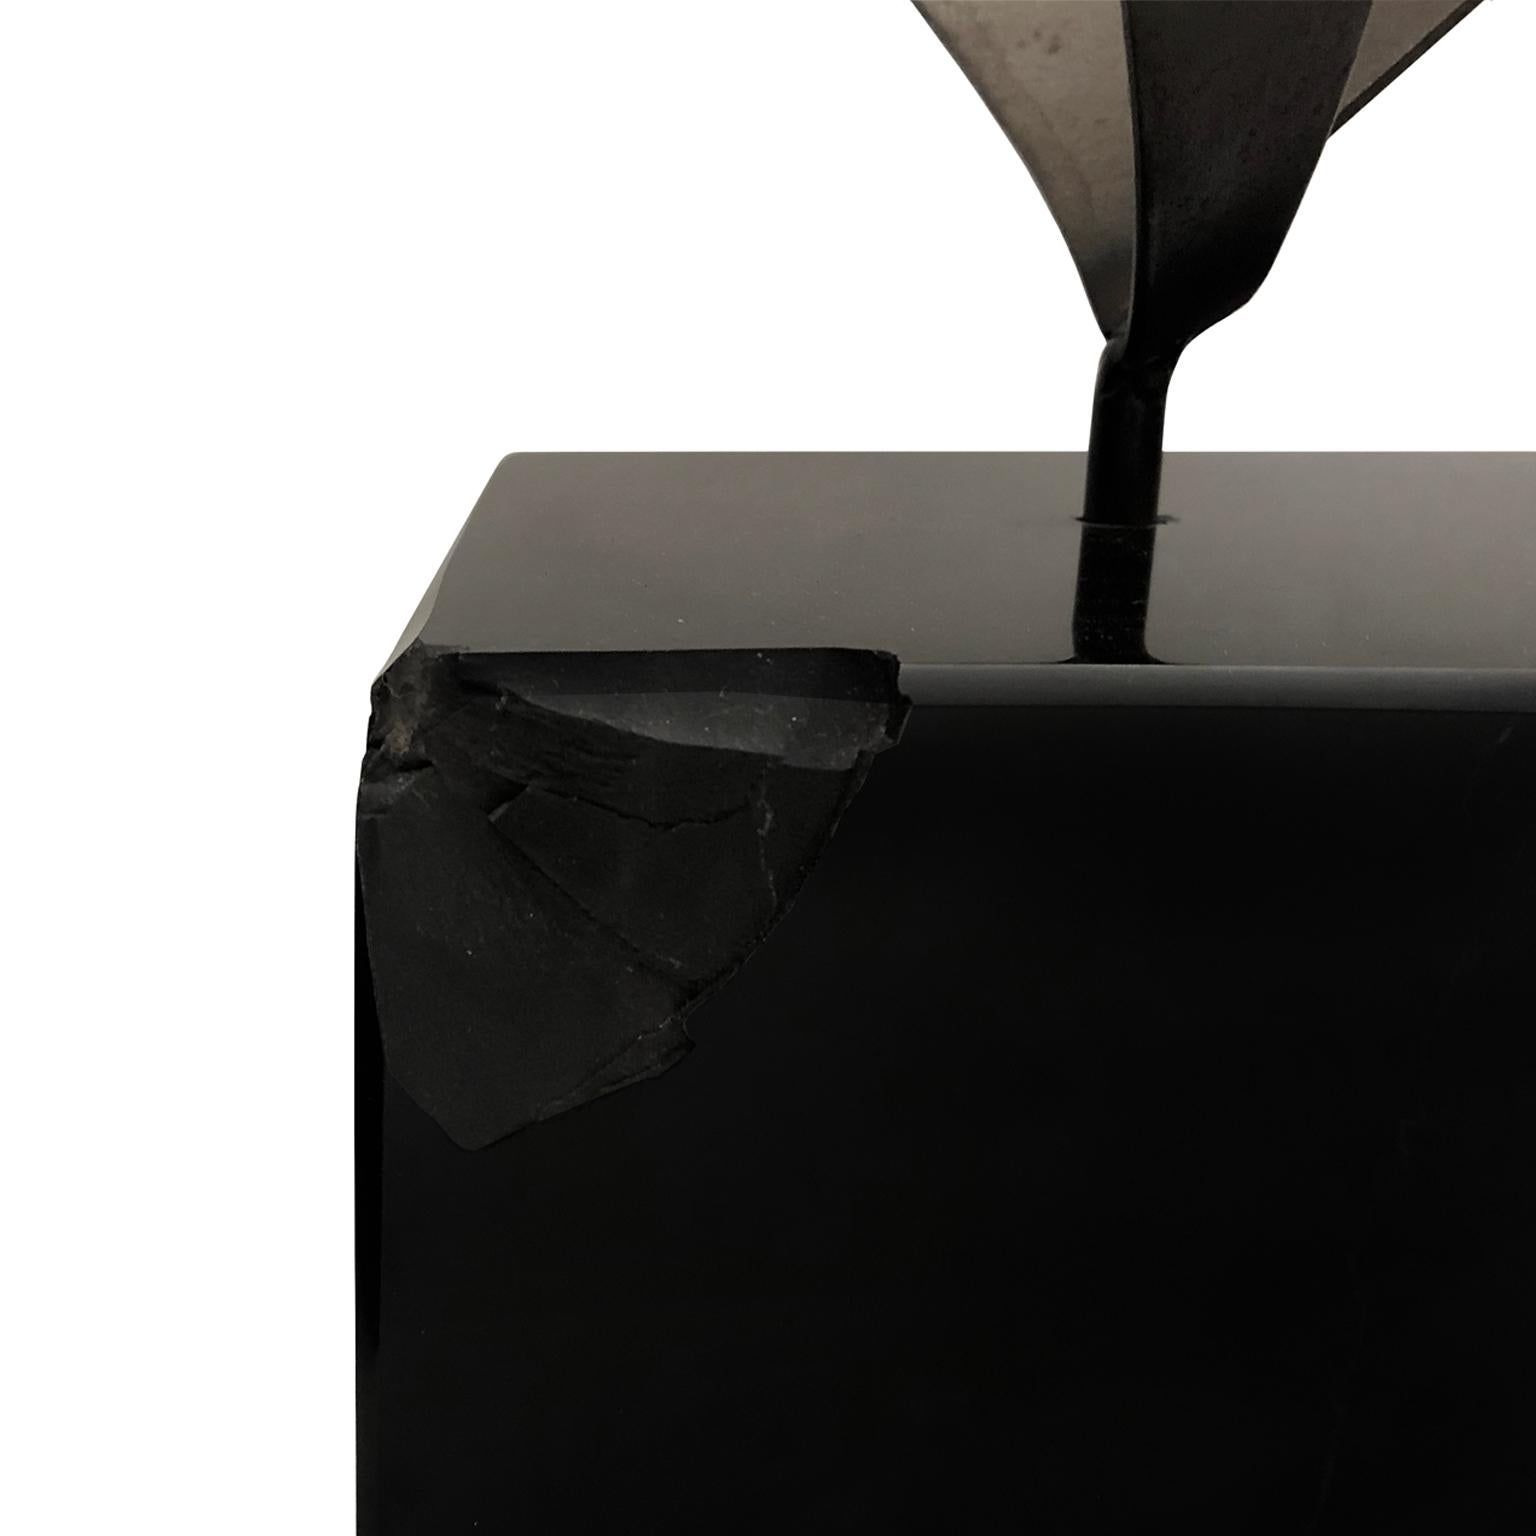 American 1970s Abstract Metal Wave Sculpture on Square Black Stone Base